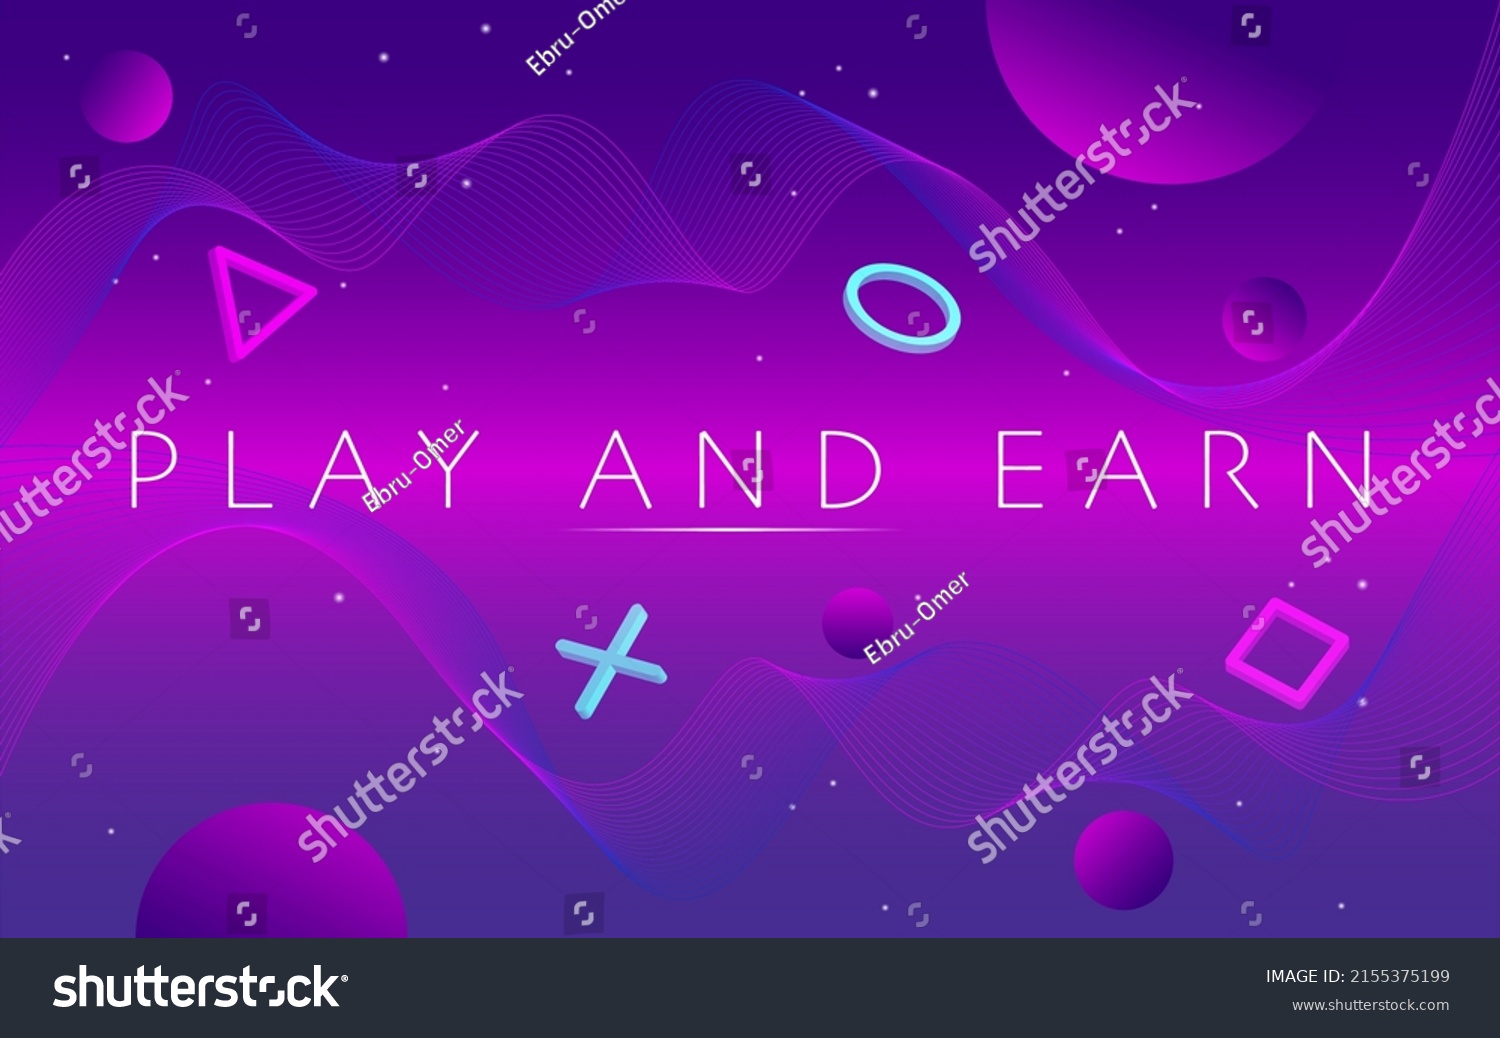 SVG of Play and Earn, GameFi technology. P2E model turns into a Play and Earn model. Neon geometric shapes and text on cyberspace background. svg